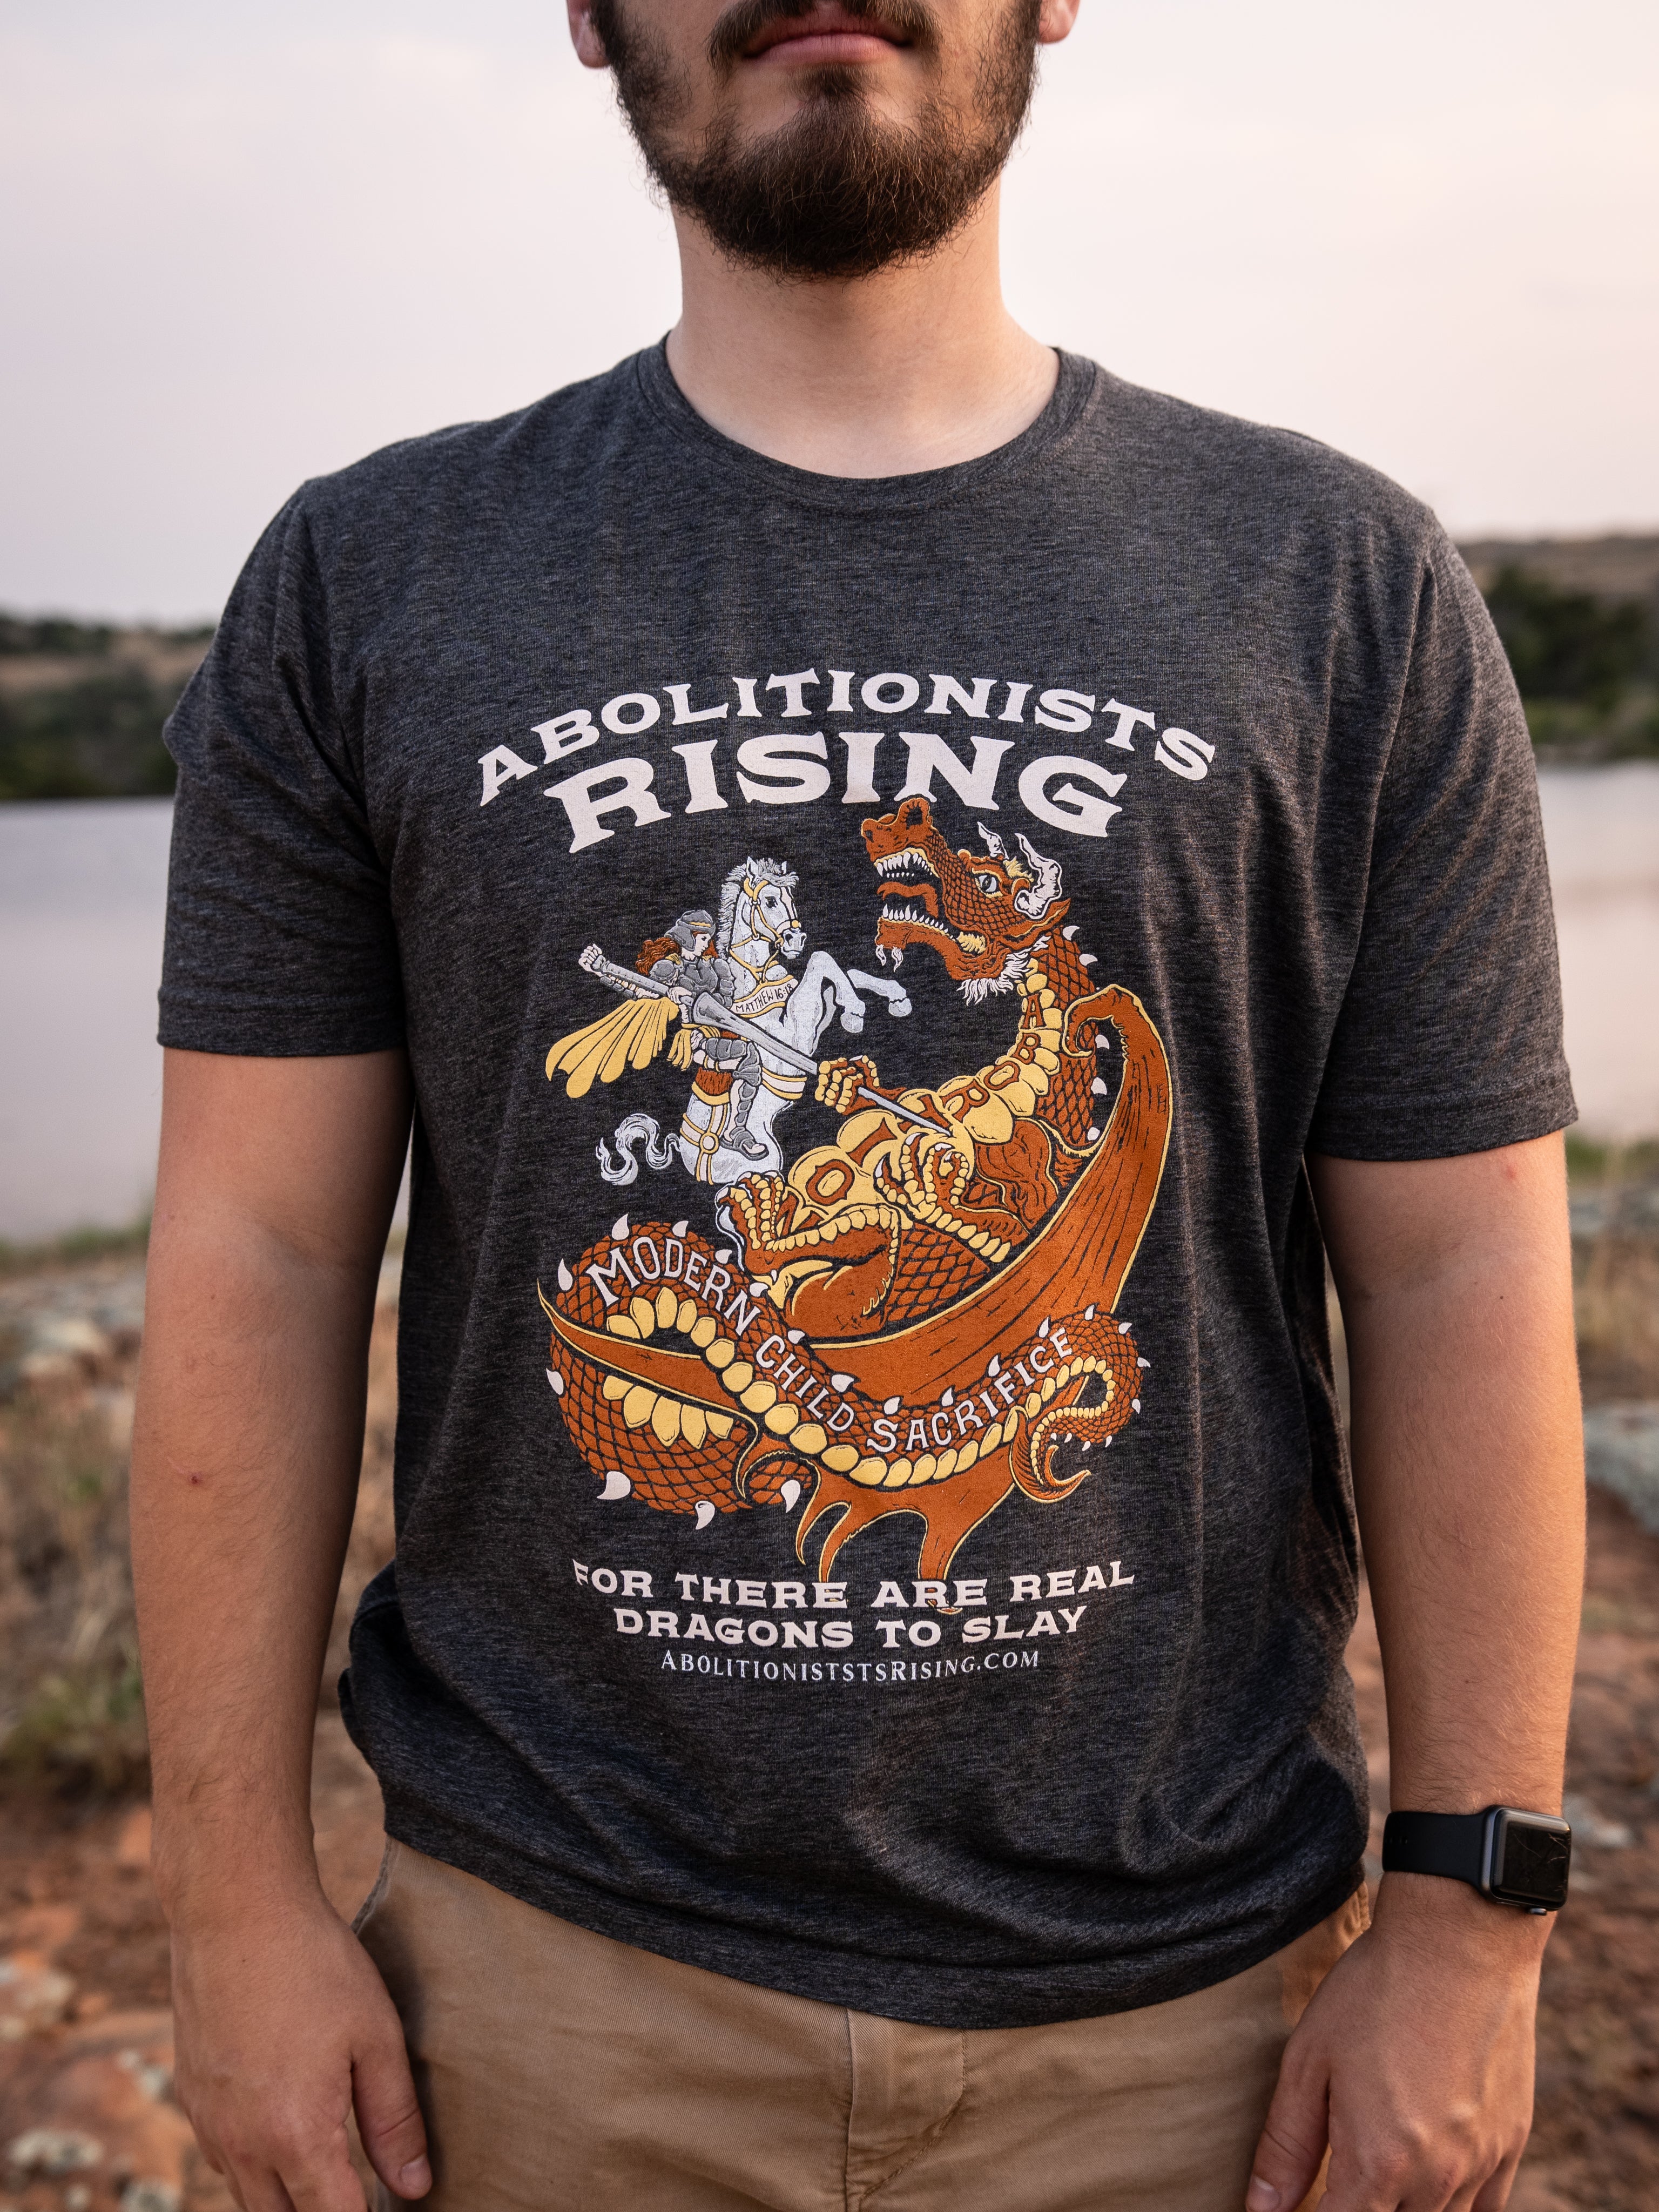 The Ultimate Dragon Slayer Collection - T-Shirt (Unisex), Dropcards, and Art Print